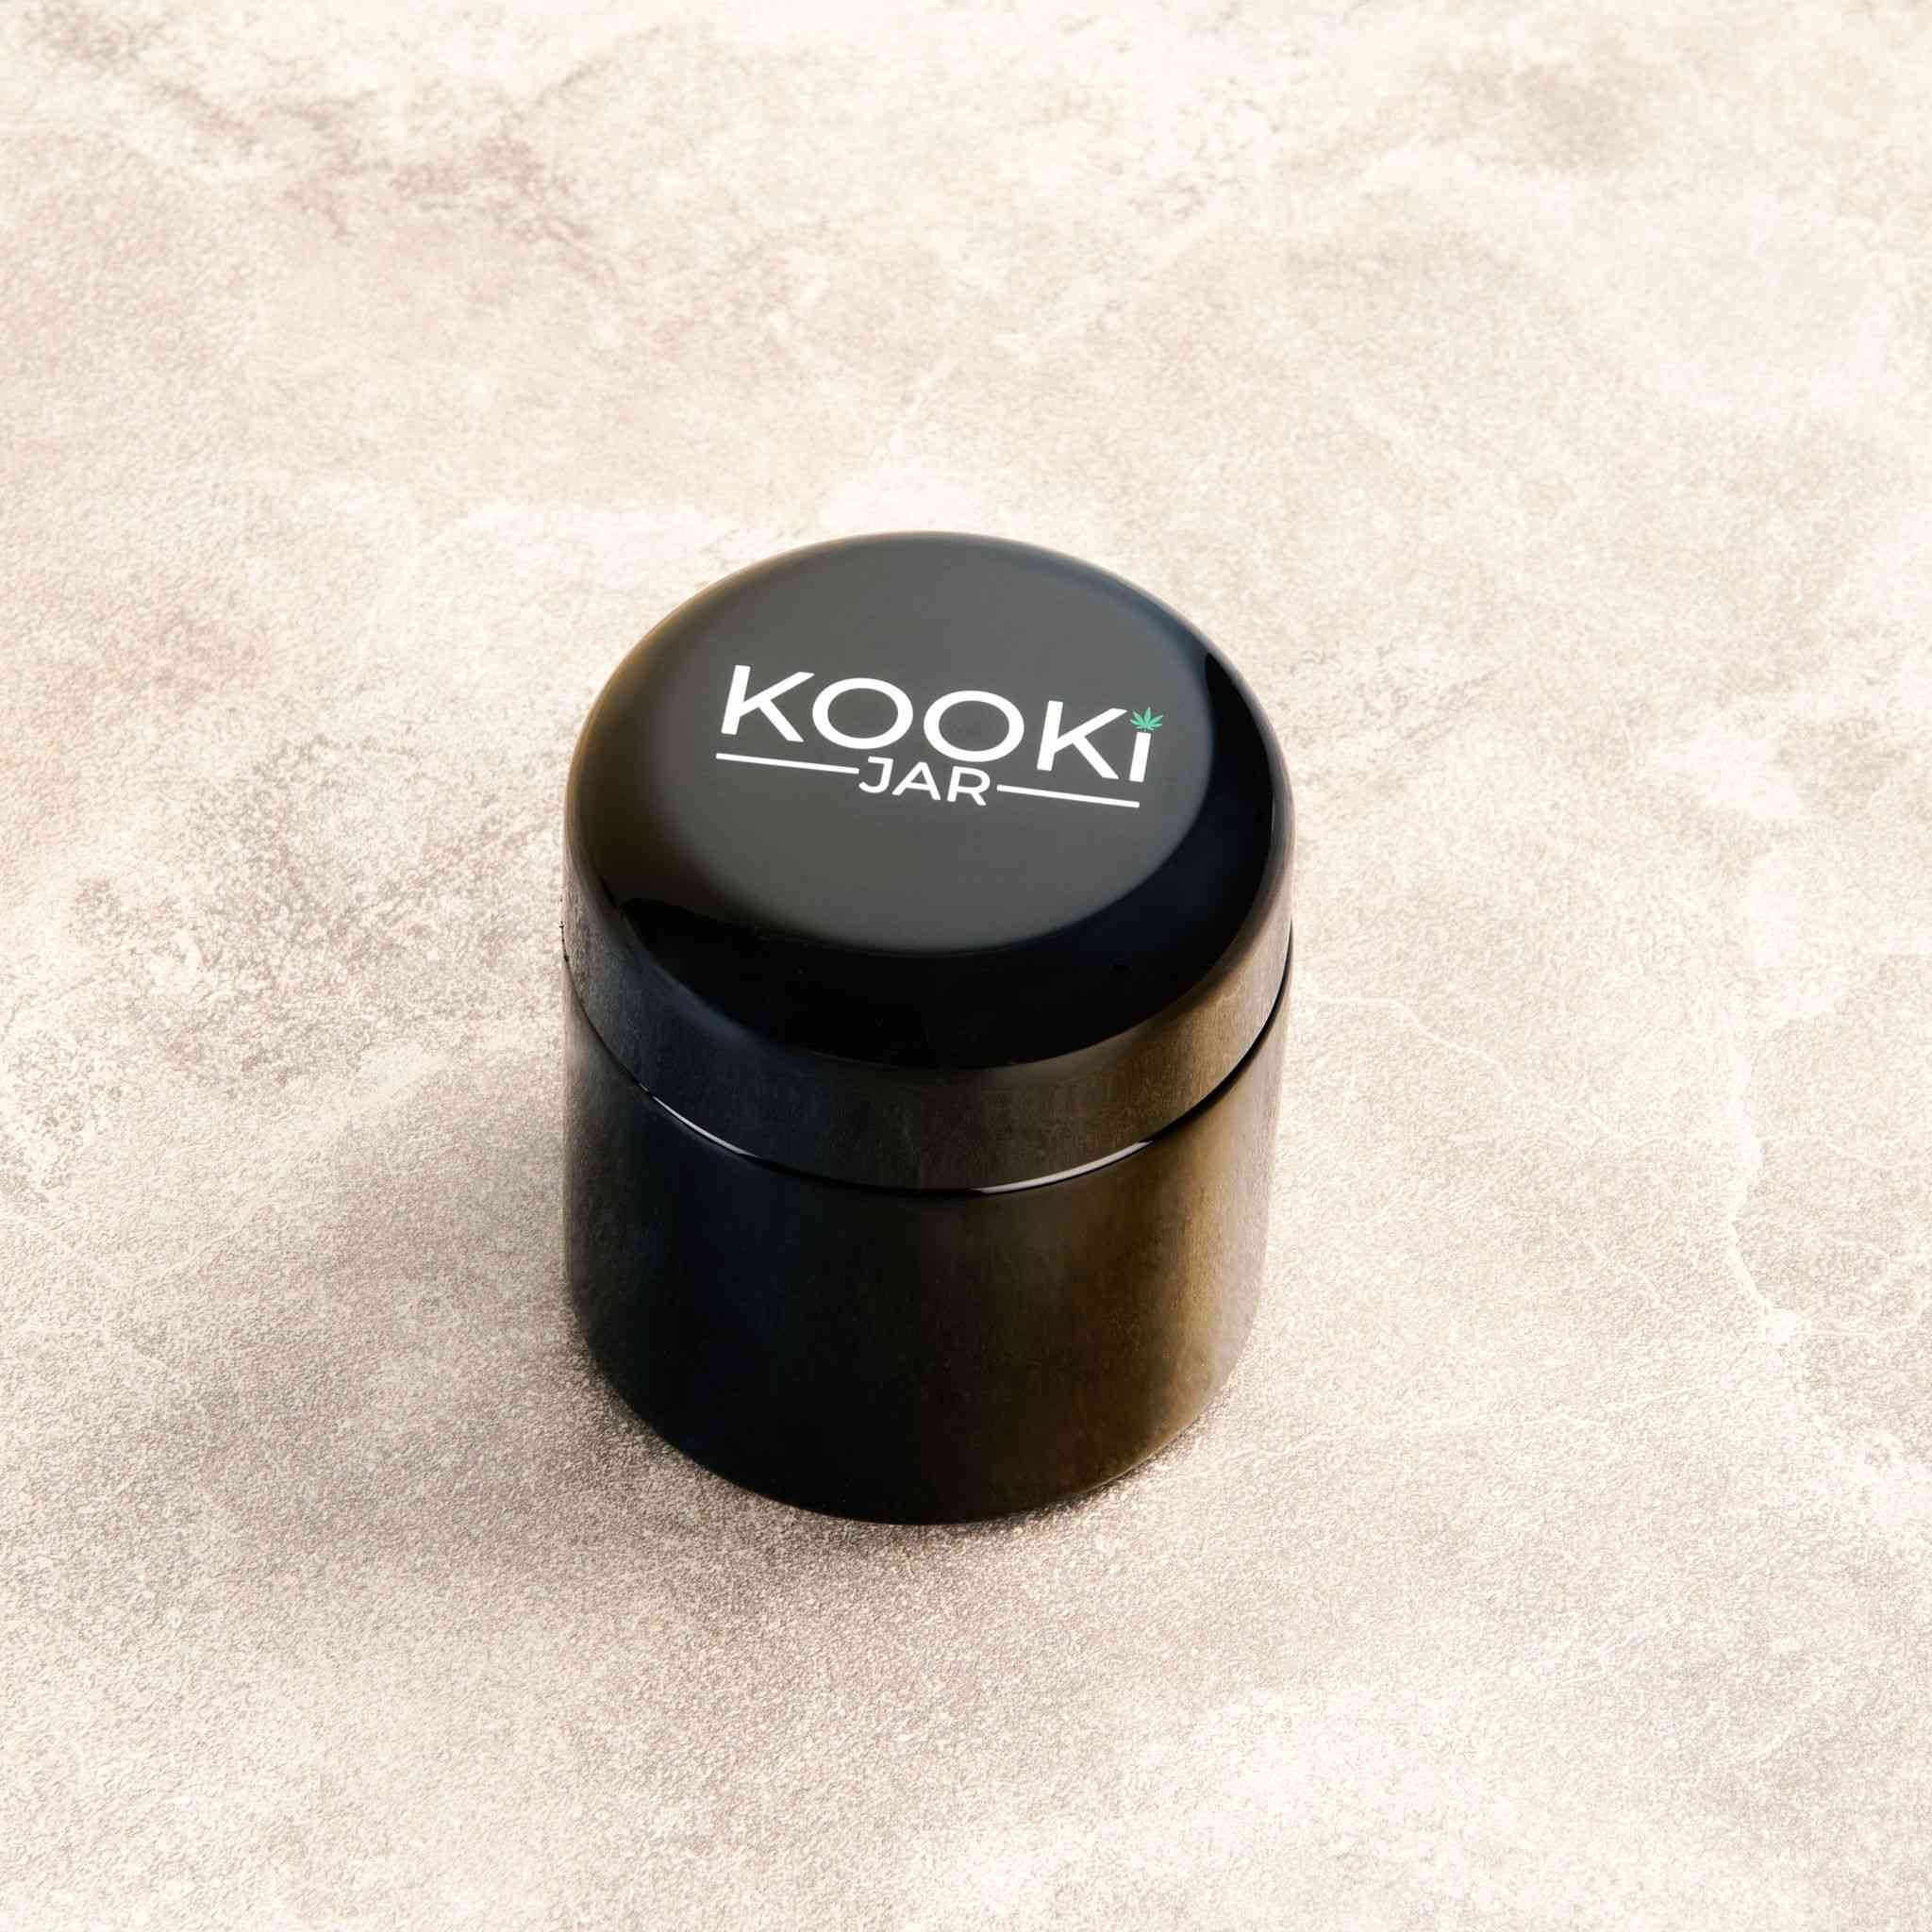 Enhanced strength glass + uv protection + humidity control = extended life for your top-tier flower.  Throw this stash jar in your backpack on the next road trip. 